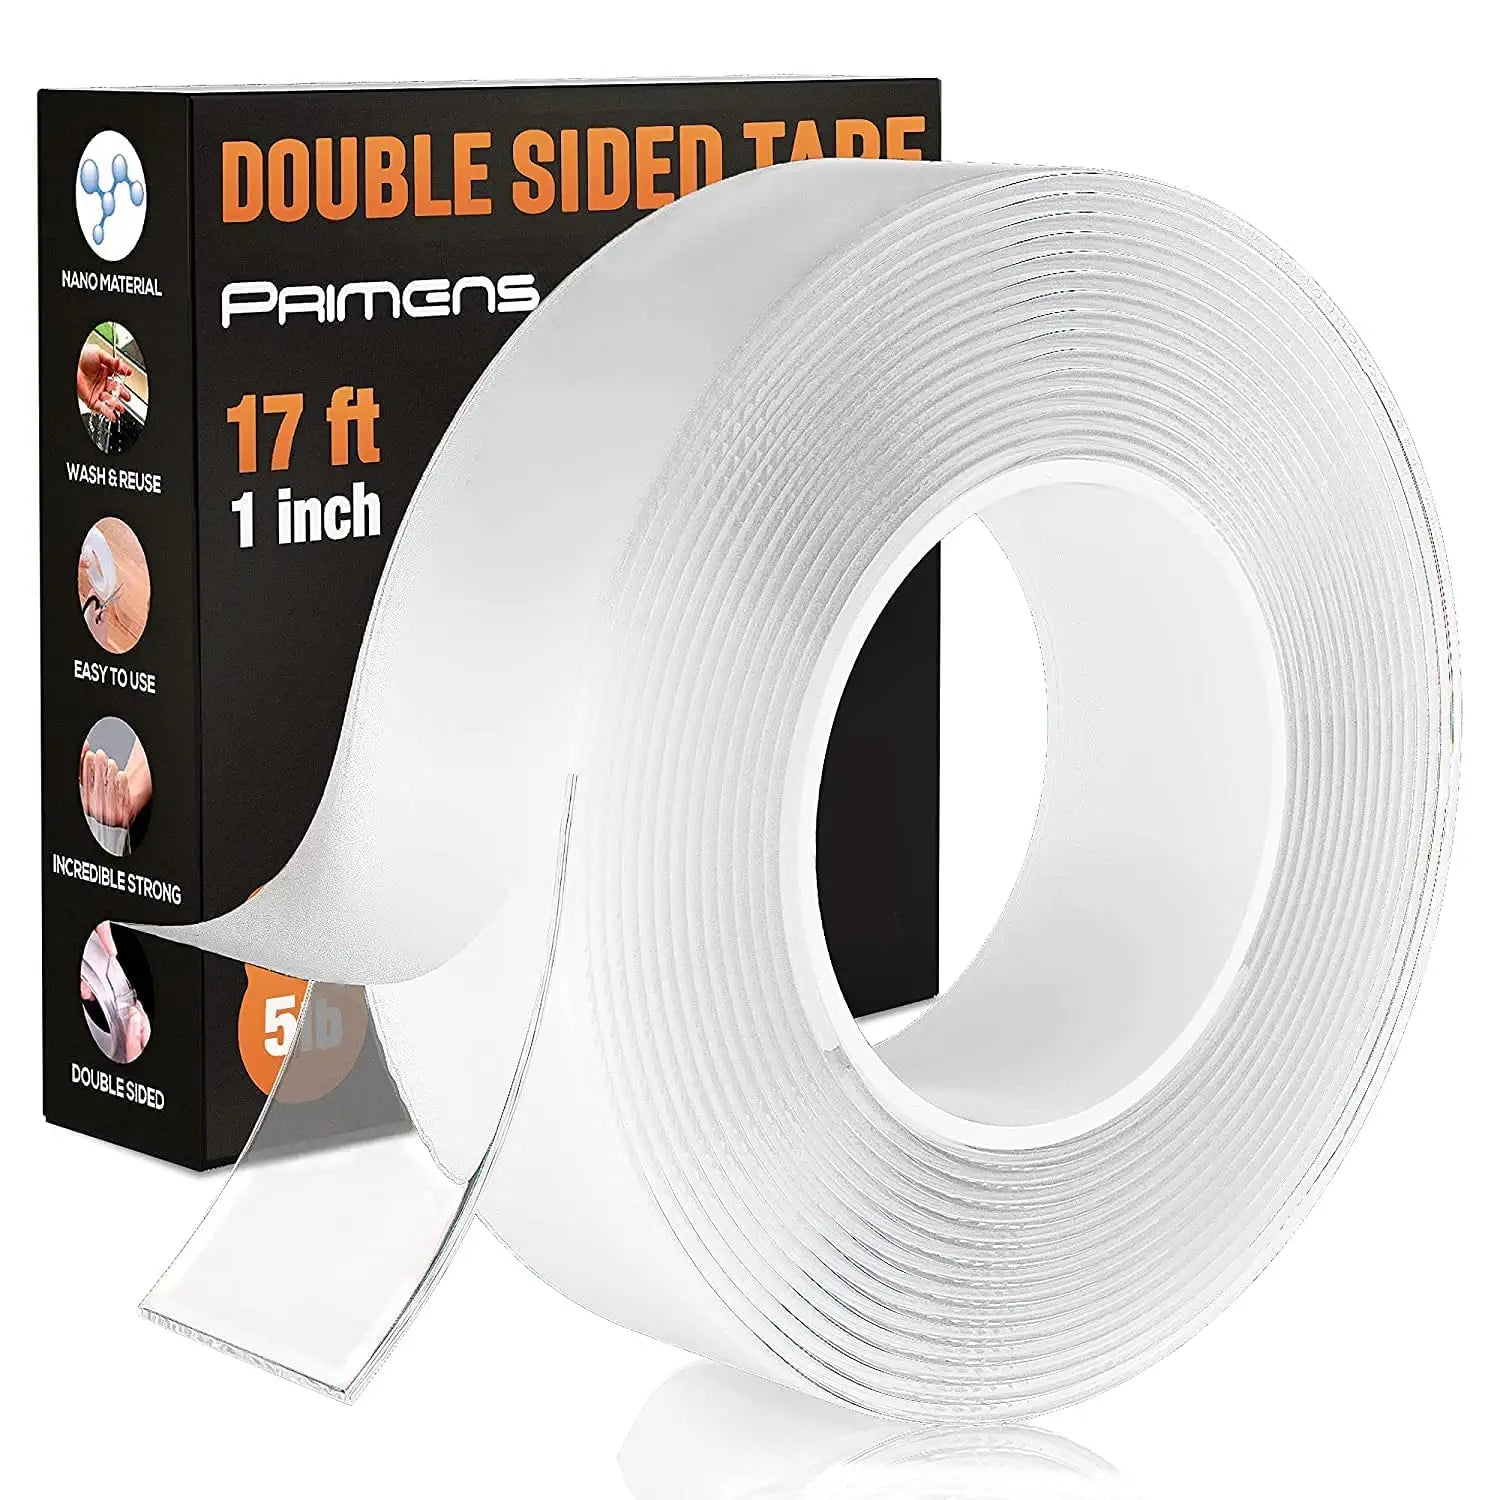 Double Sided Tape Heavy Duty, Sticky Two Sided Tape Heavy Duty Adhesive Tape, Removable, Reusable Adhesive Strips Sticky Wall Tape Strips for